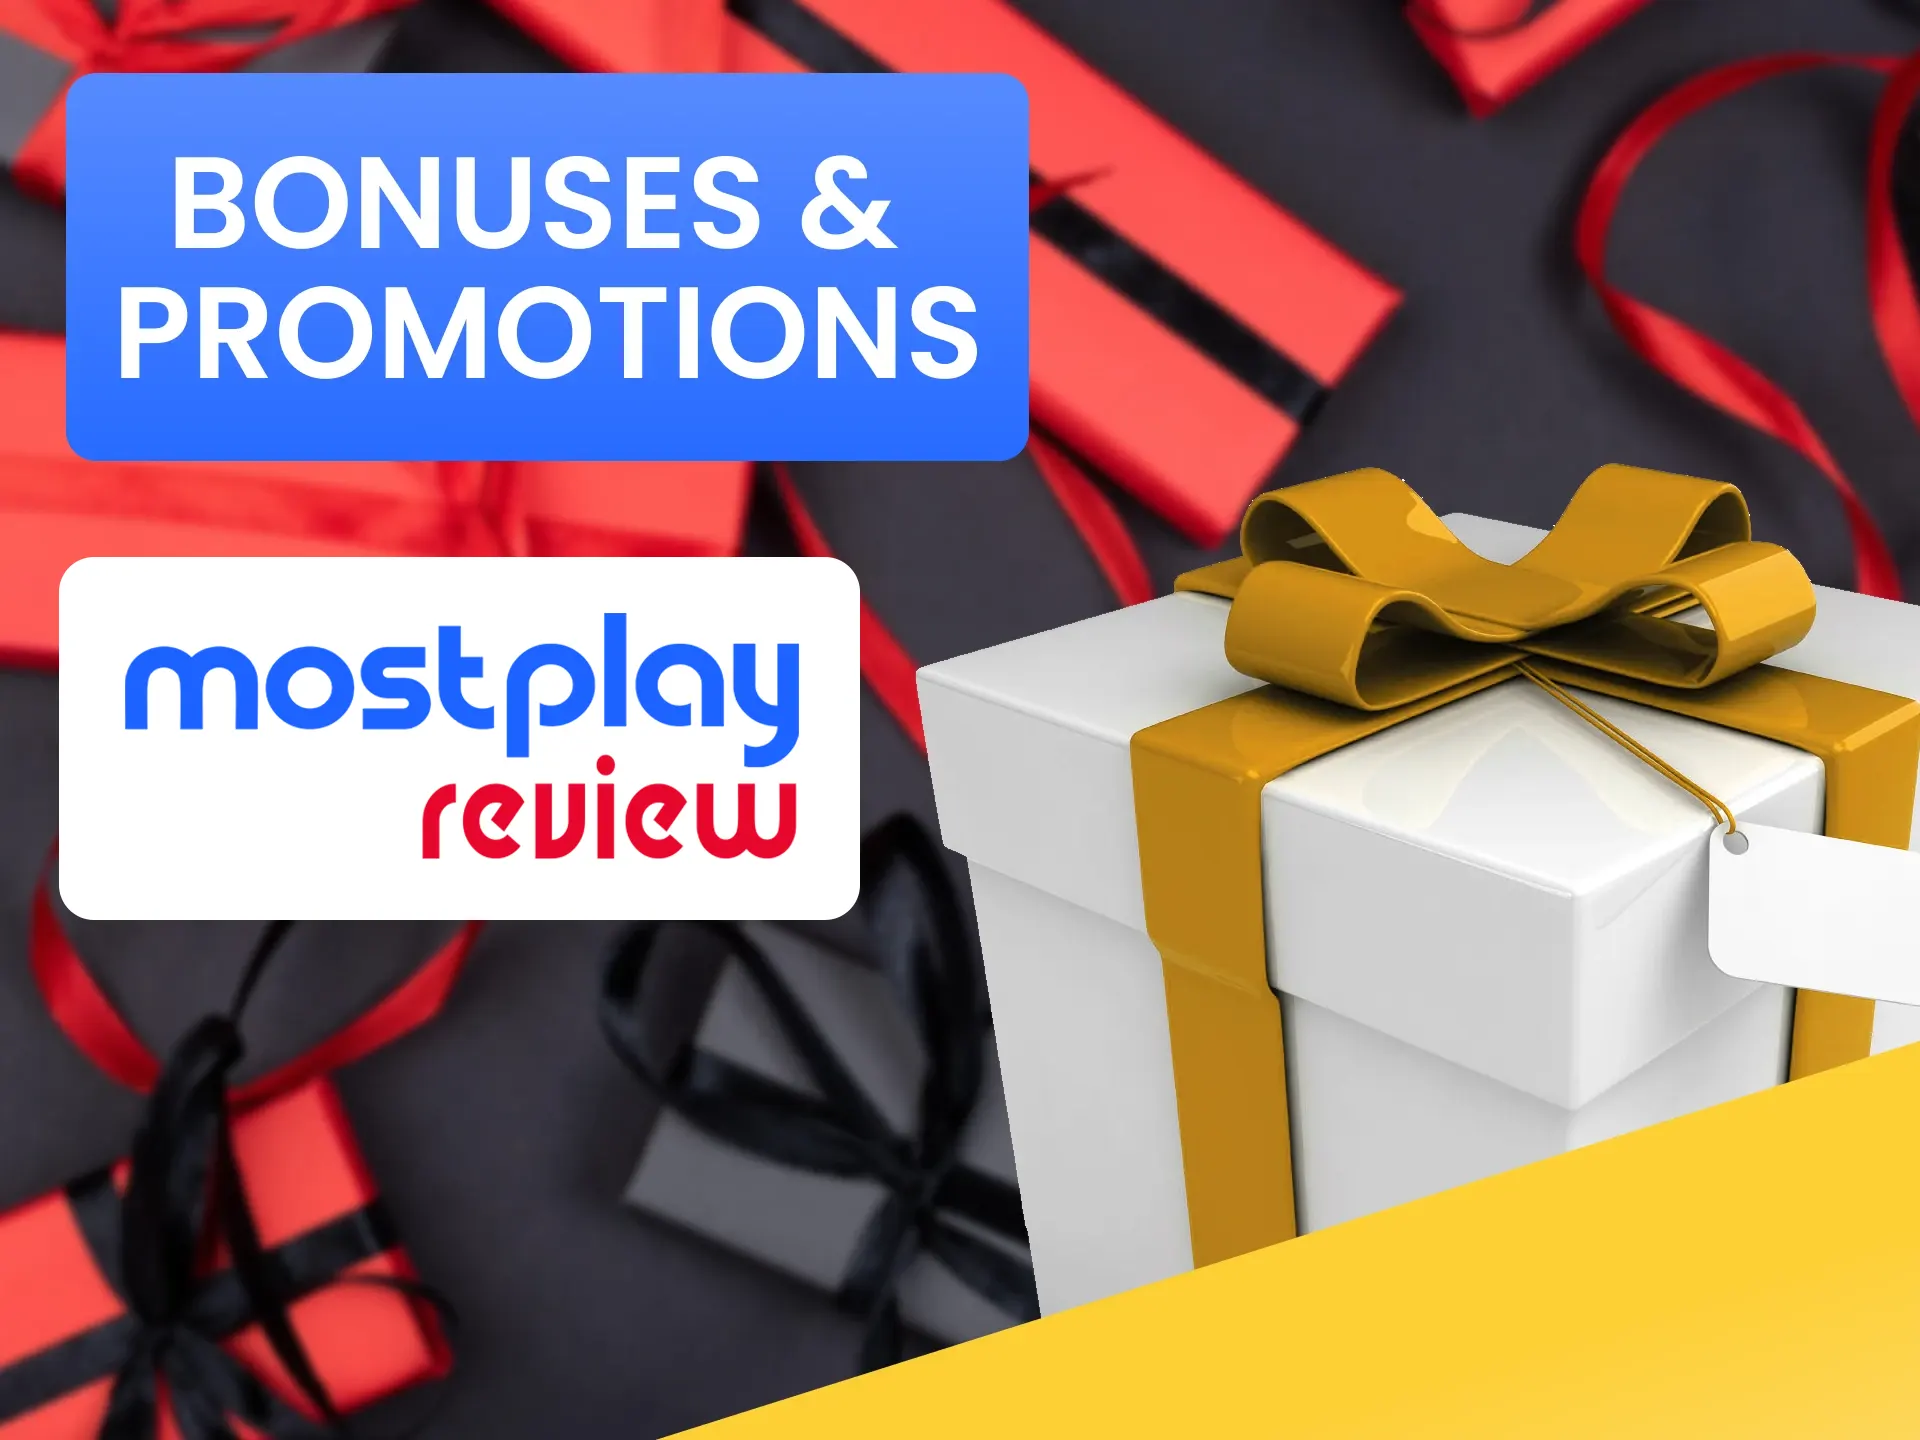 Get extra bonuses from Mostpaly.